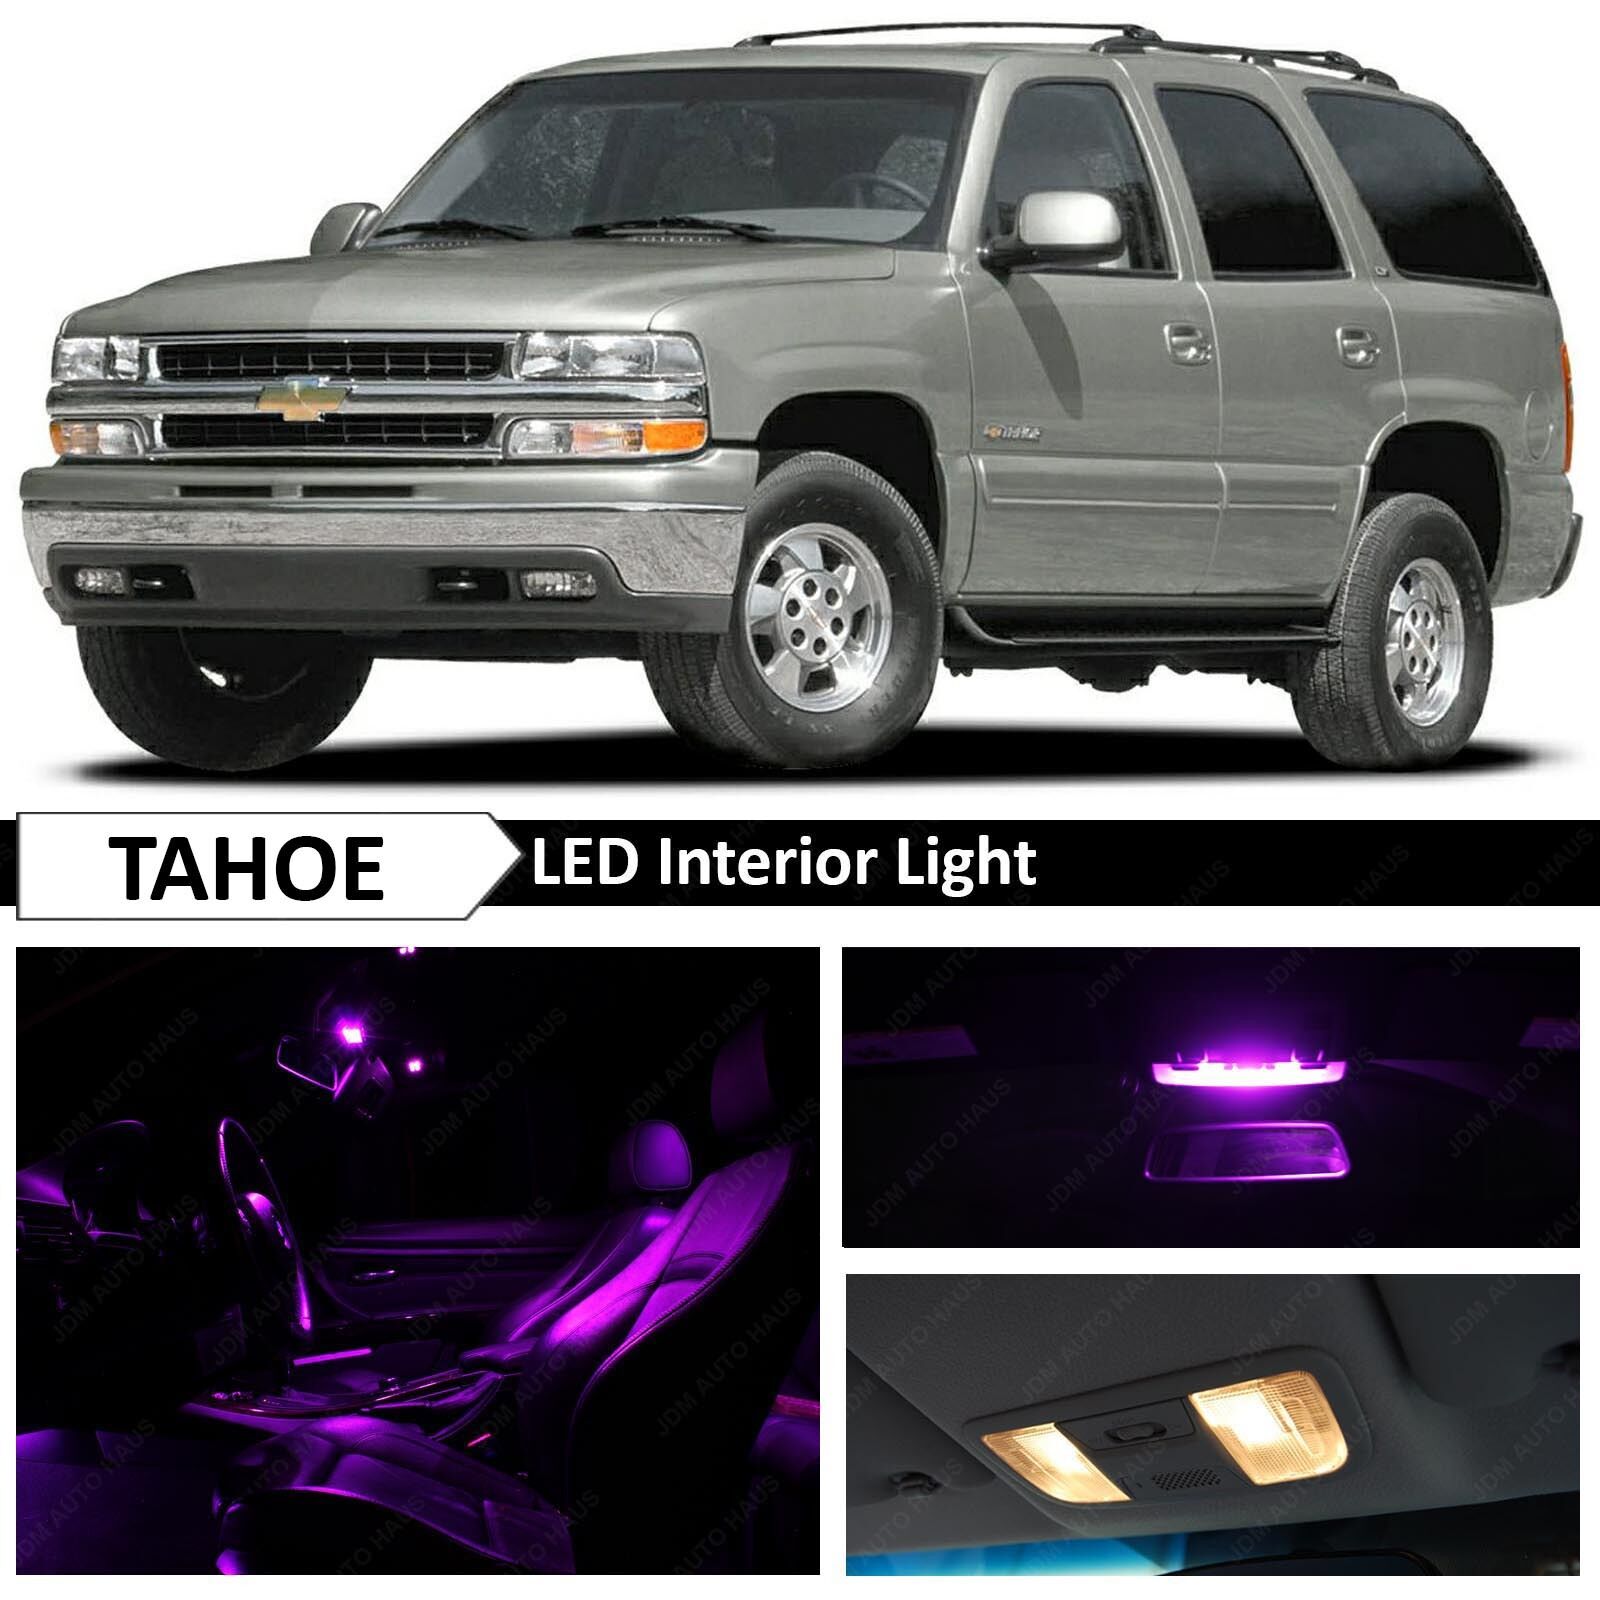 20x Purple Full Interior LED Lights Bulbs Package Kit for 2000-2006 Chevy Tahoe